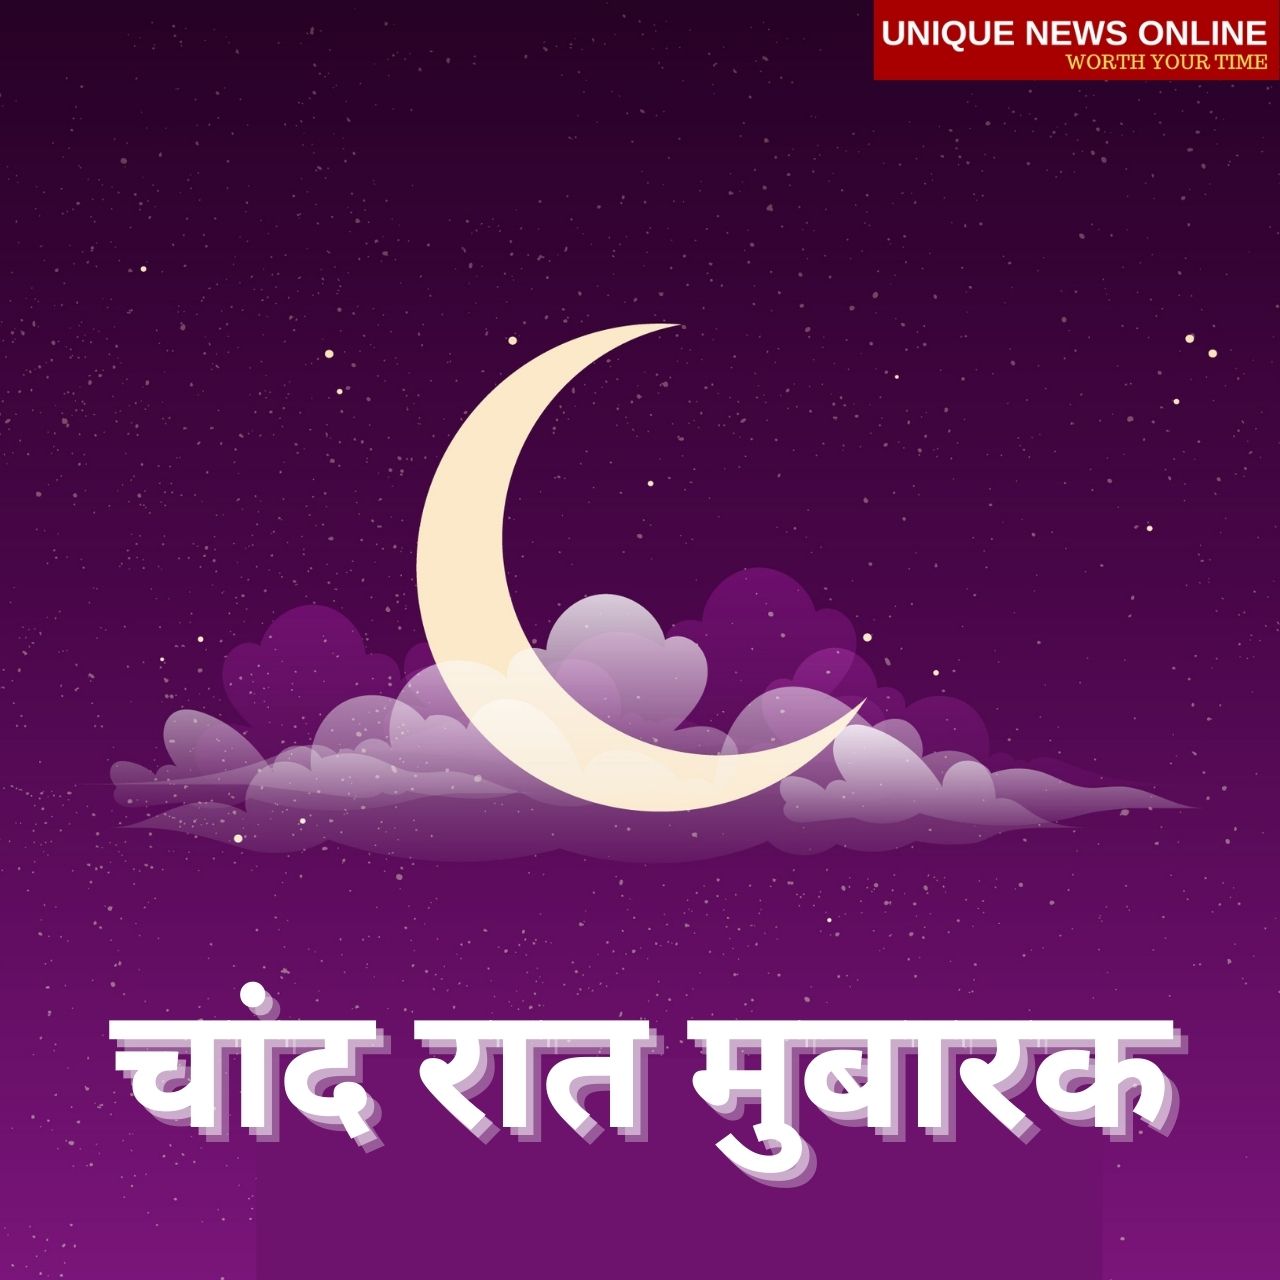 Chaand Raat Mubarak 2021 wishes in Hindi, HD Images (pic), Status, Quotes, Greetings, and Messages to Share